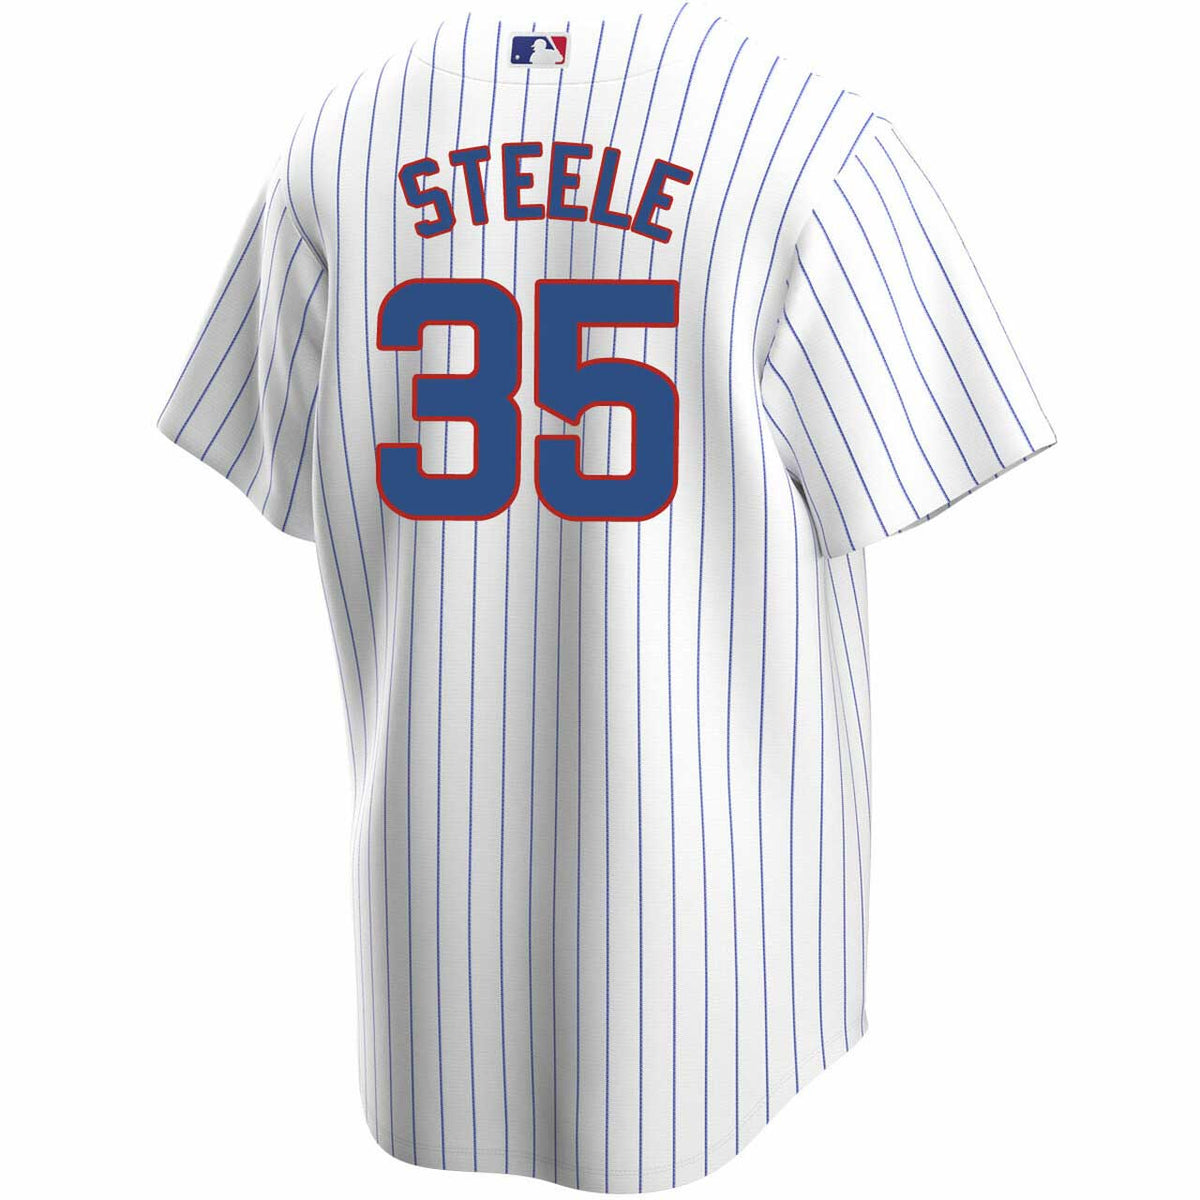 Justin Steele #35 Chicago Cubs Name & Number Player T-Shirt Gifts Unisex  S-3XL